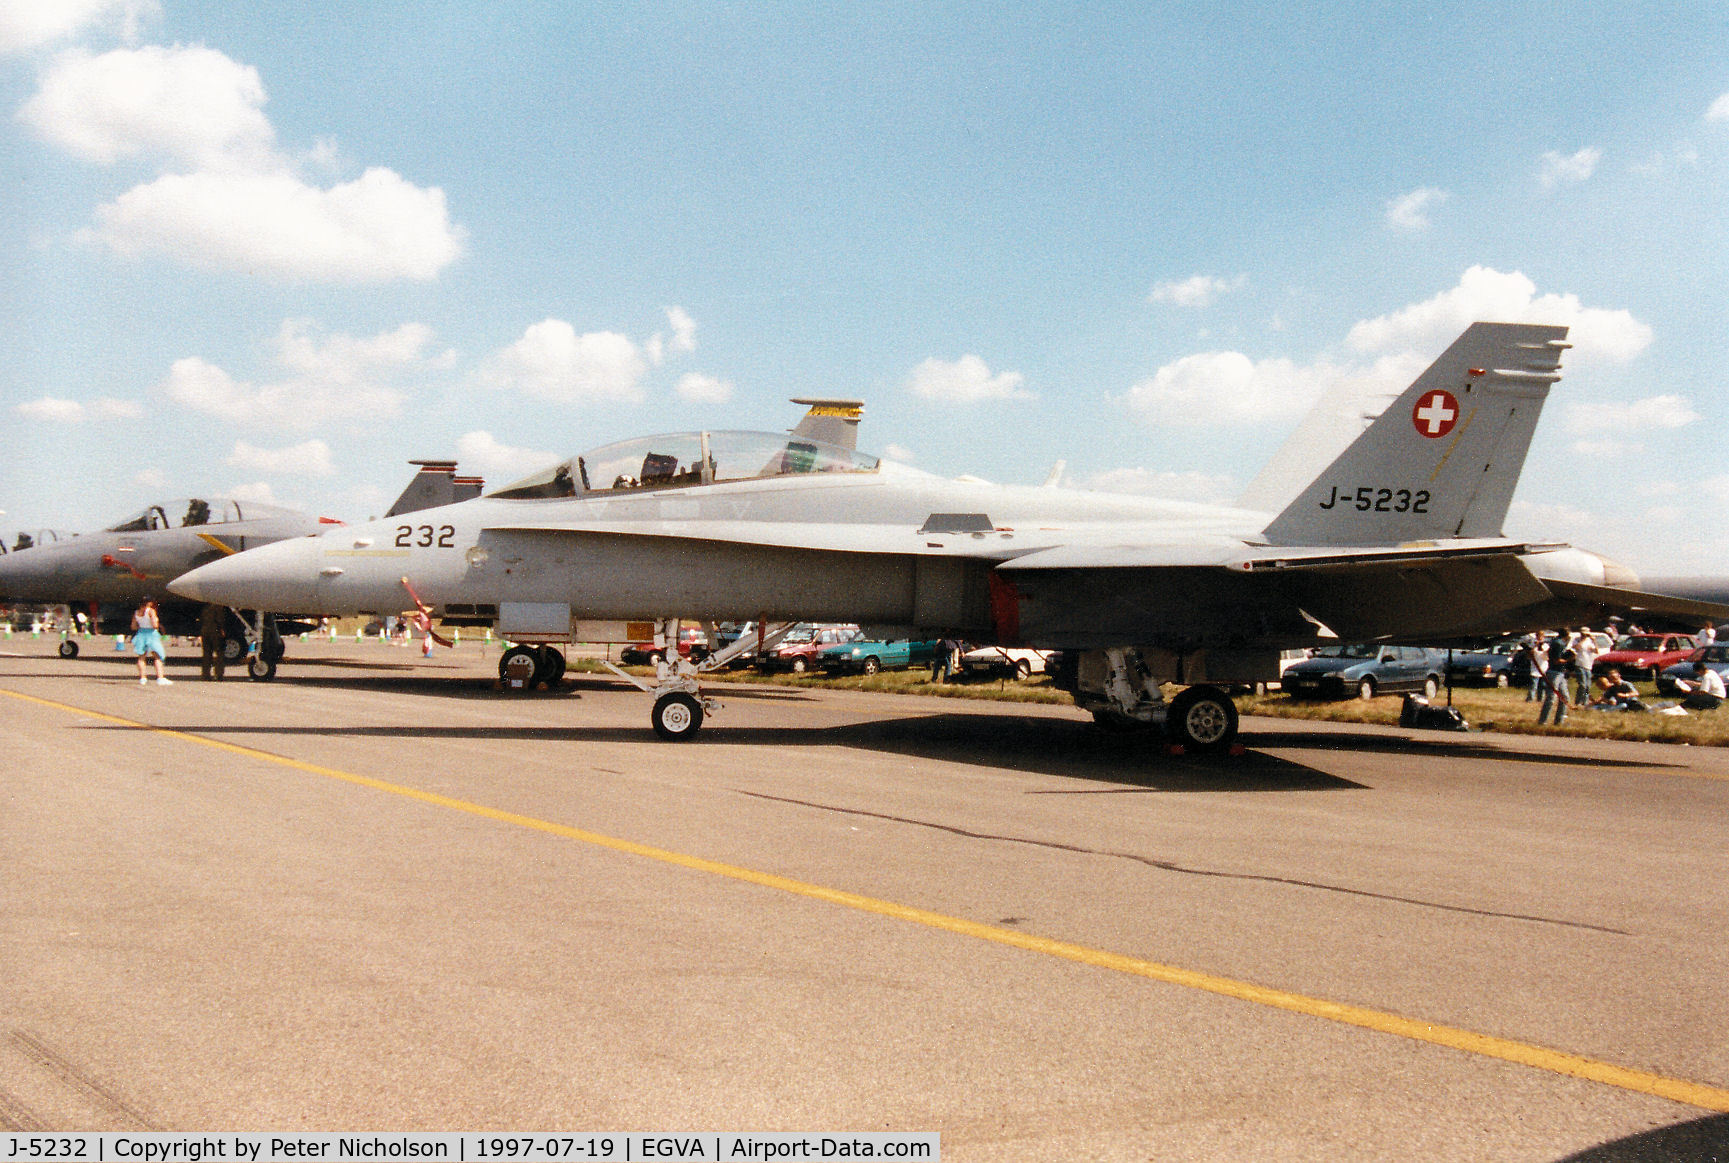 J-5232, 1996 McDonnell Douglas F/A-18D Hornet C/N 1308, F/A-18D Hornet of the Swiss Air Force on display at the 1997 Intnl Air Tattoo at RAF Fairford.